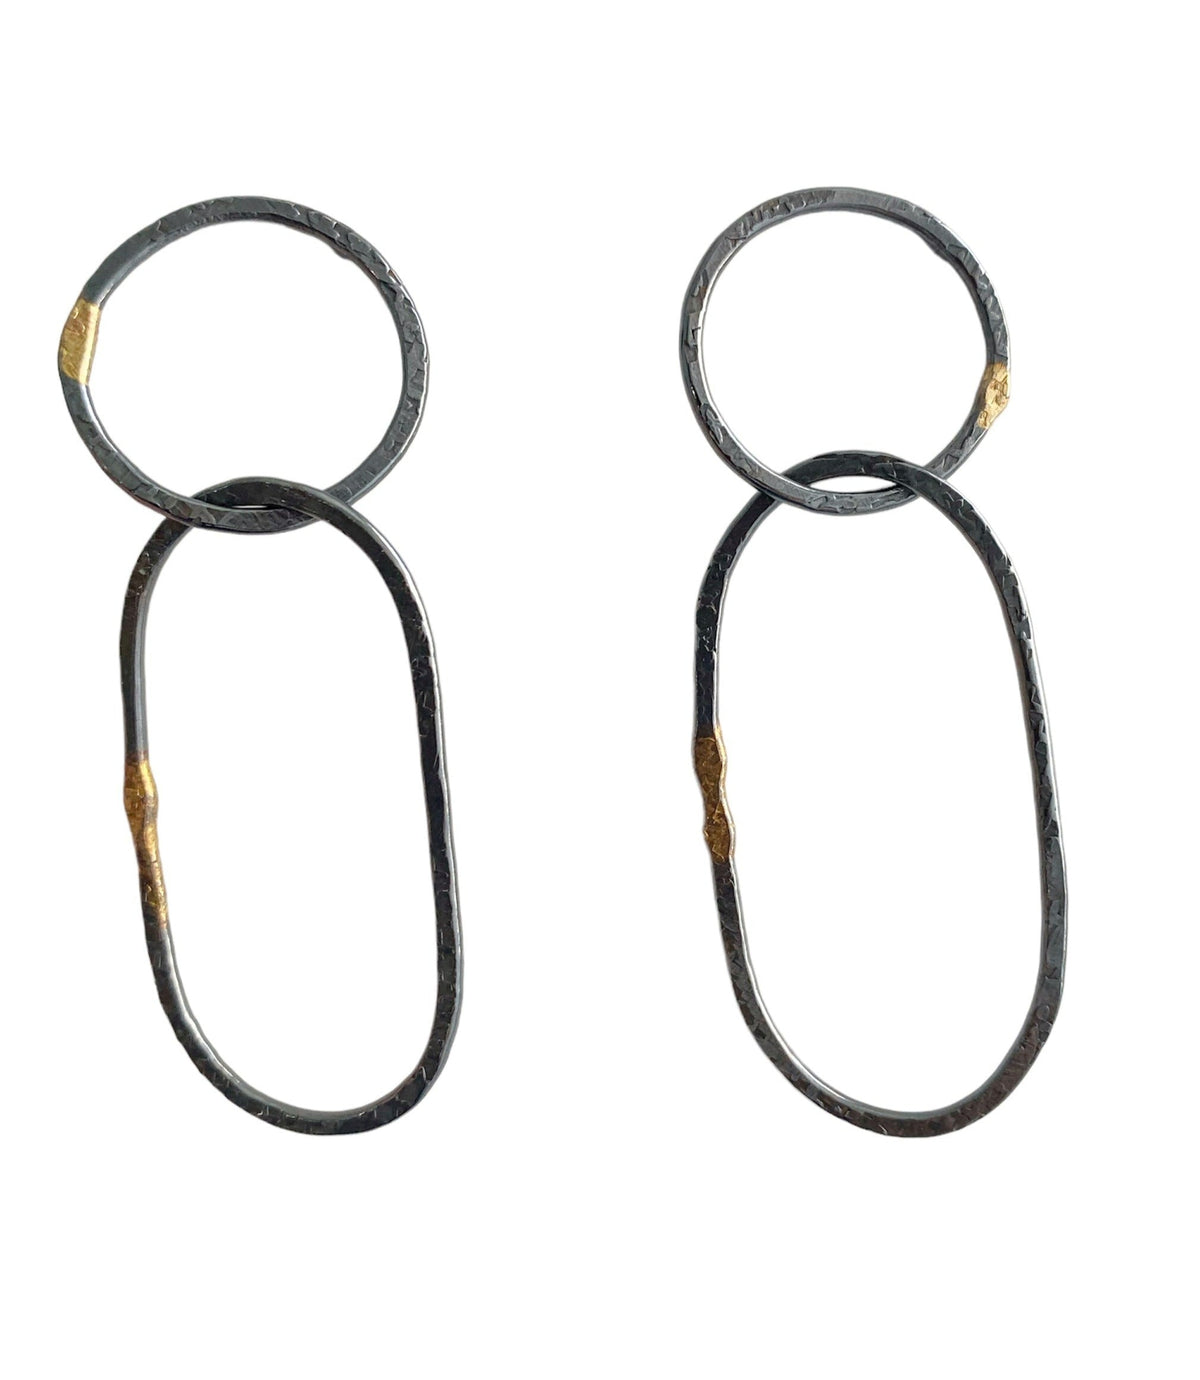 Open circle stud earrings with an intersecting oval dangling, dark oxidized sterling silver with 18k gold accents